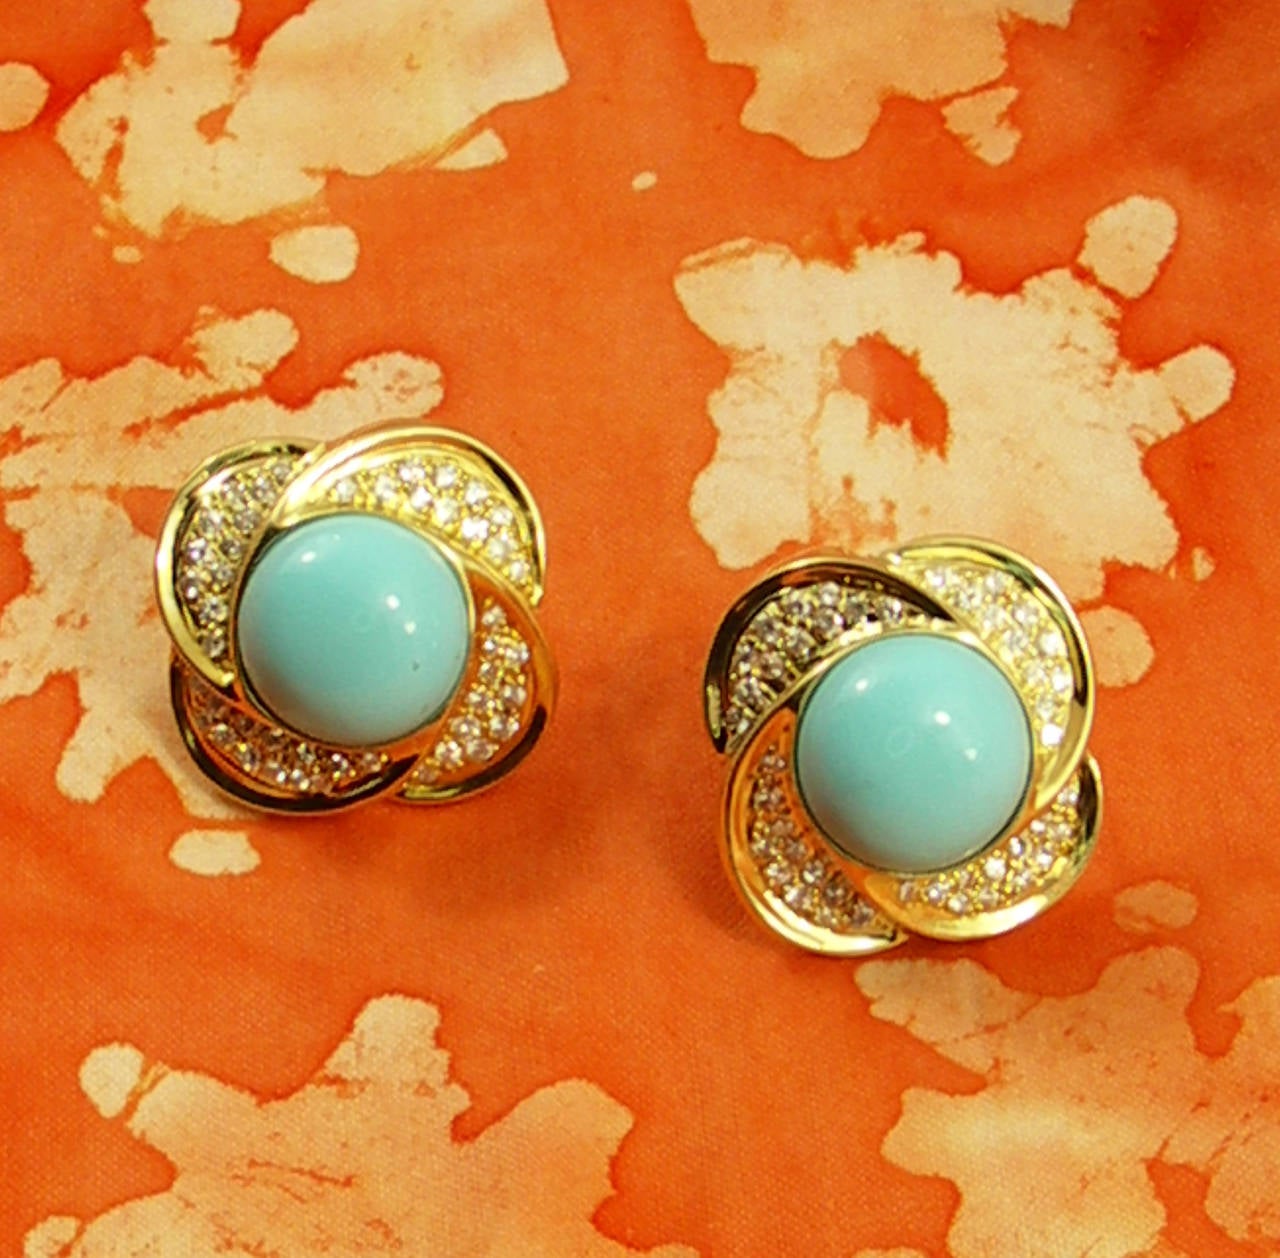 A pair of 18K yellow gold earrings, each set with a round cabochon turquoise, measuring 16mm. Surrounding the turquoise are four sections arranged in a floral design, and pave' set with round brilliant cut diamonds. These beautiful earrings measure